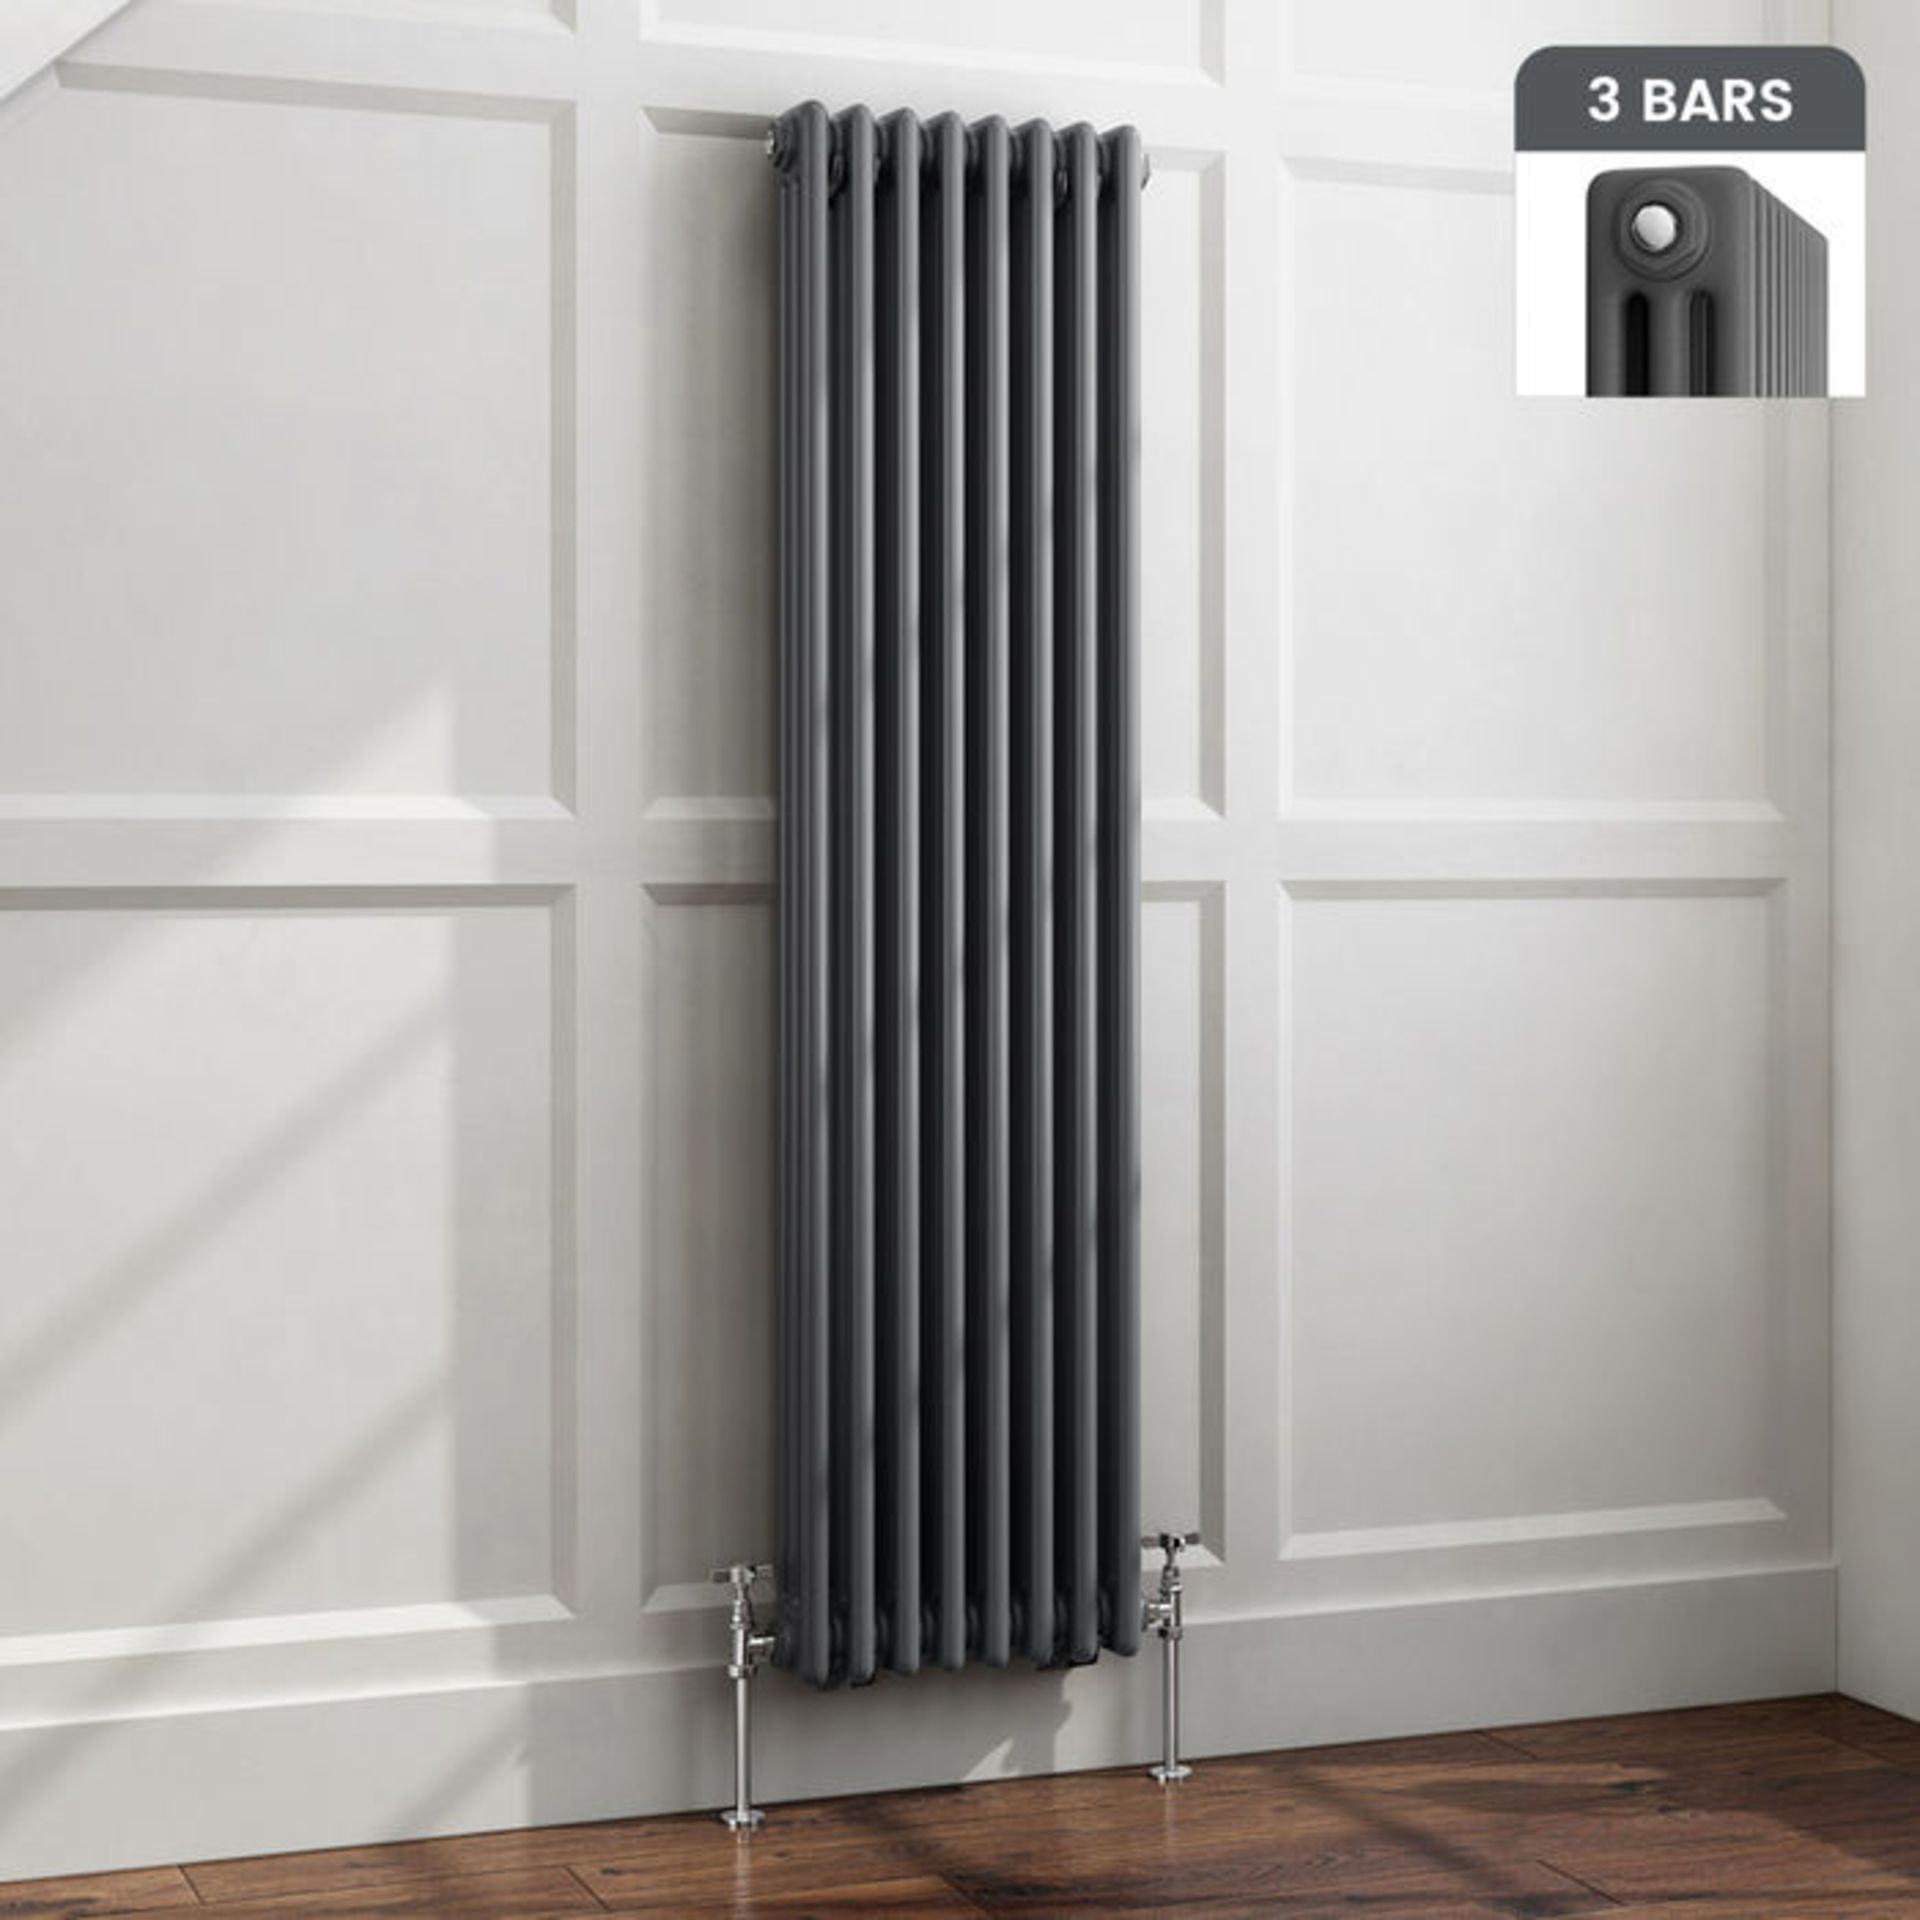 (TA181) 1500x380mm Anthracite Triple Panel Vertical Colosseum Traditional Radiator. RRP £399.99.